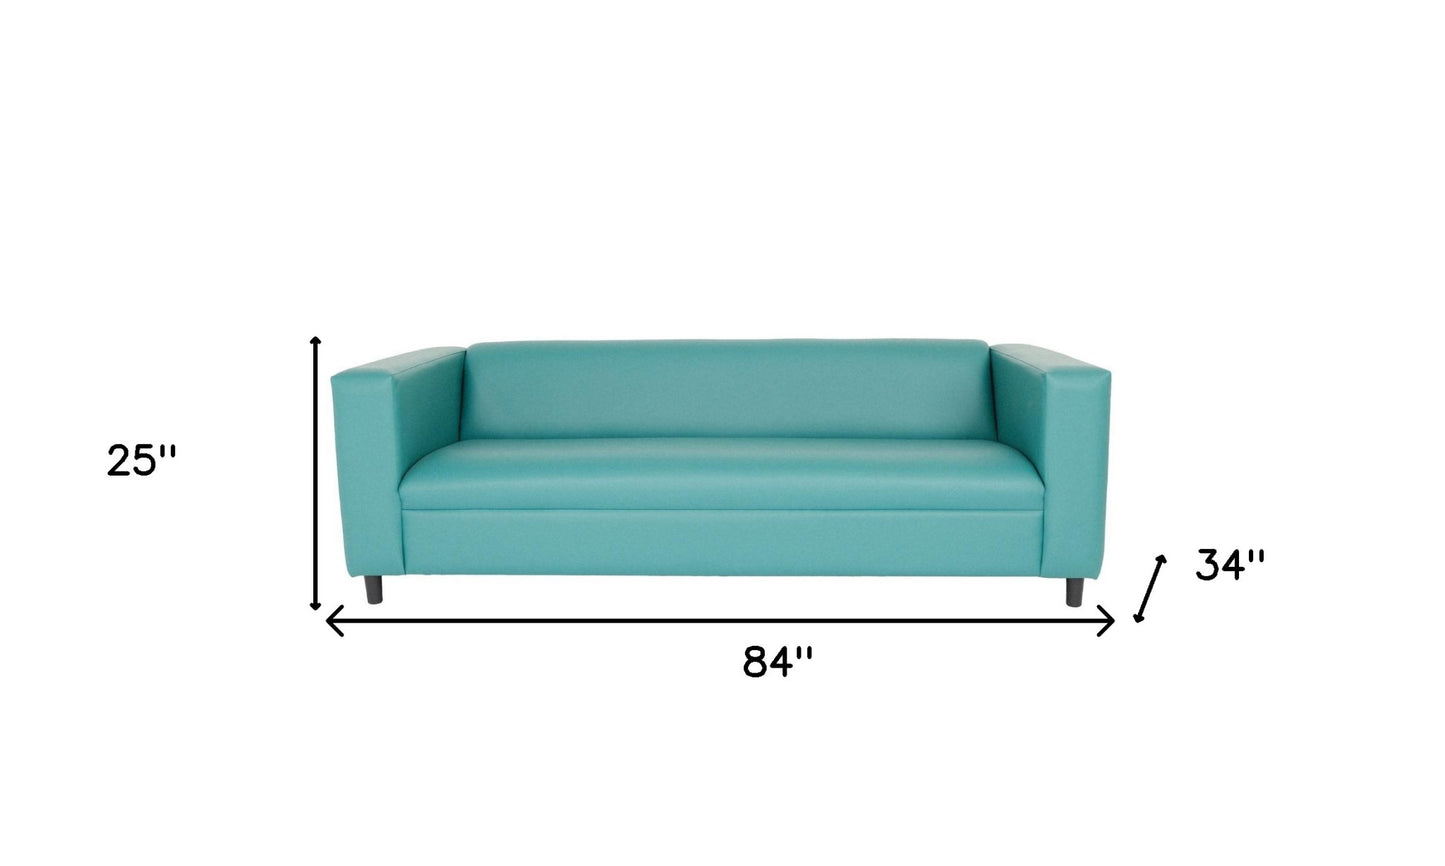 84" Blue Faux Leather Sofa With Black Legs